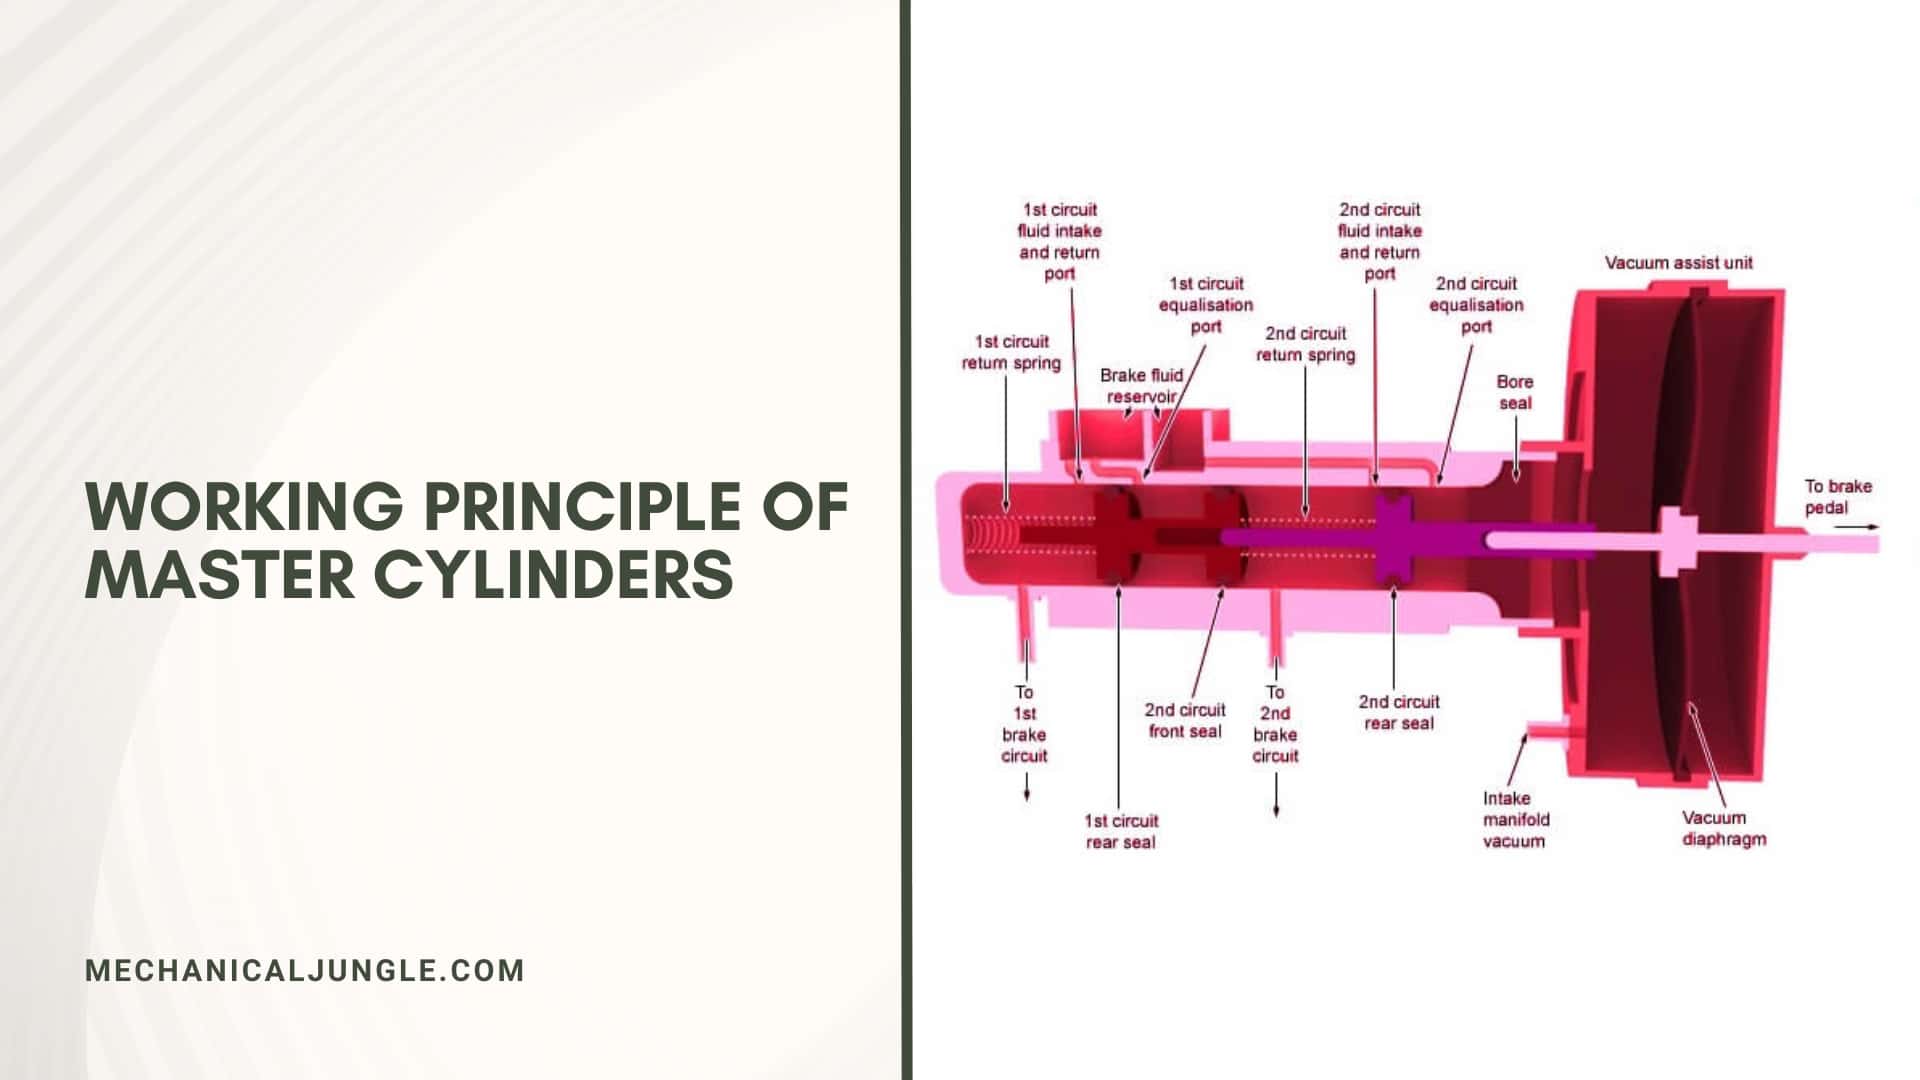 Working Principle of Master Cylinders